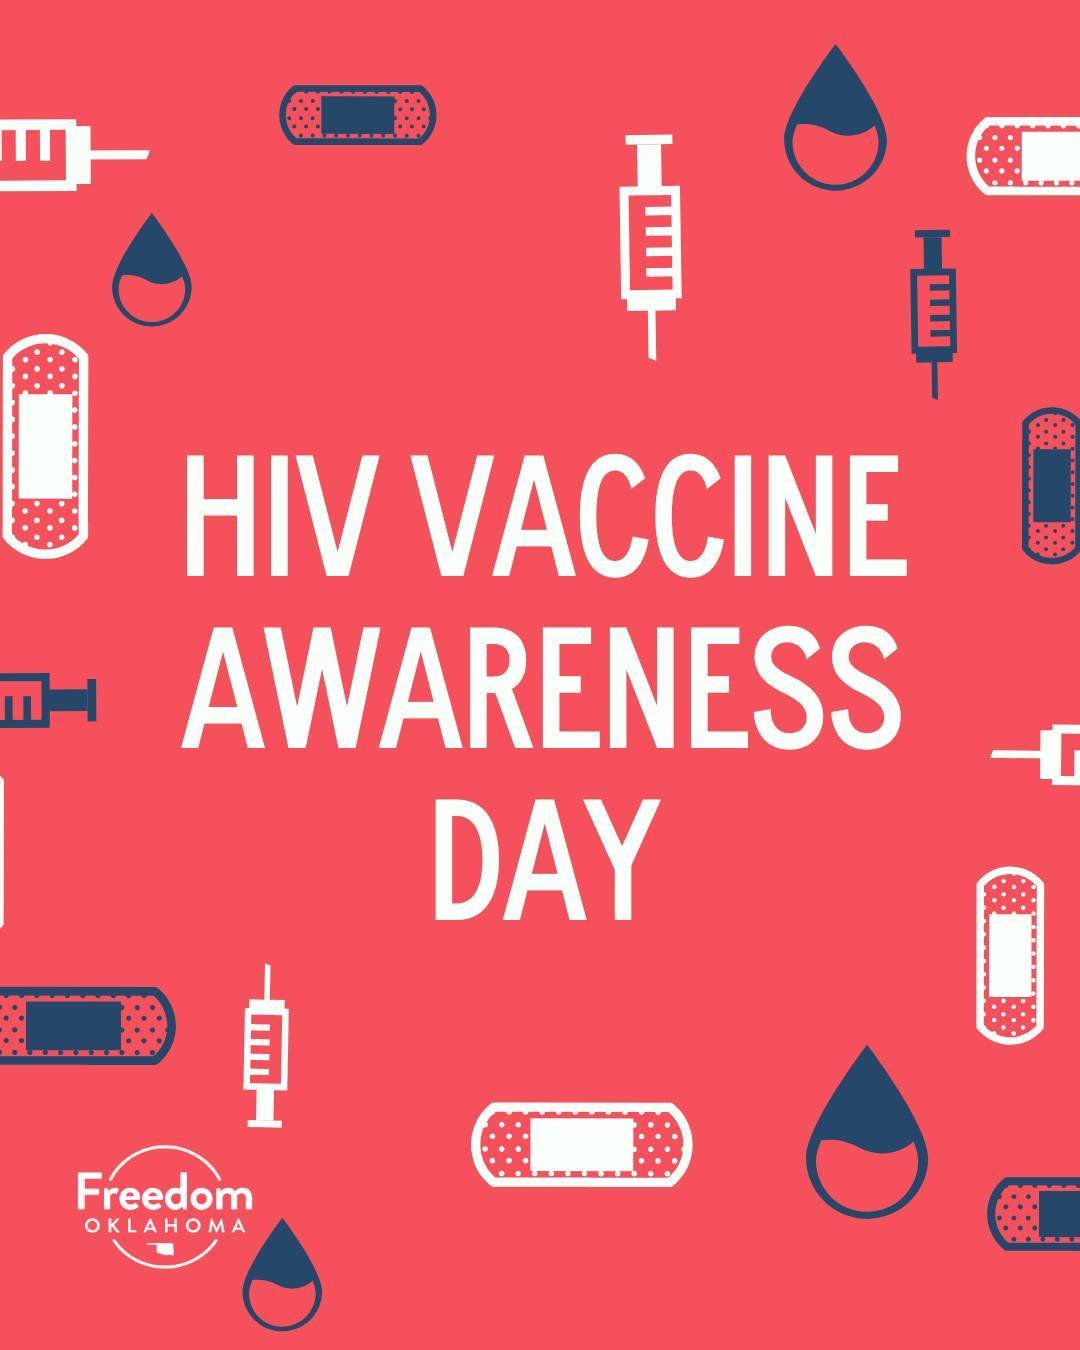 Today is HIV Vaccine Awareness Day, a day to recognize the volunteers, community members, and researchers working to find a safe and effective vaccine to prevent HIV. Such a vaccine, along with existing HIV treatment and prevention strategies, would 